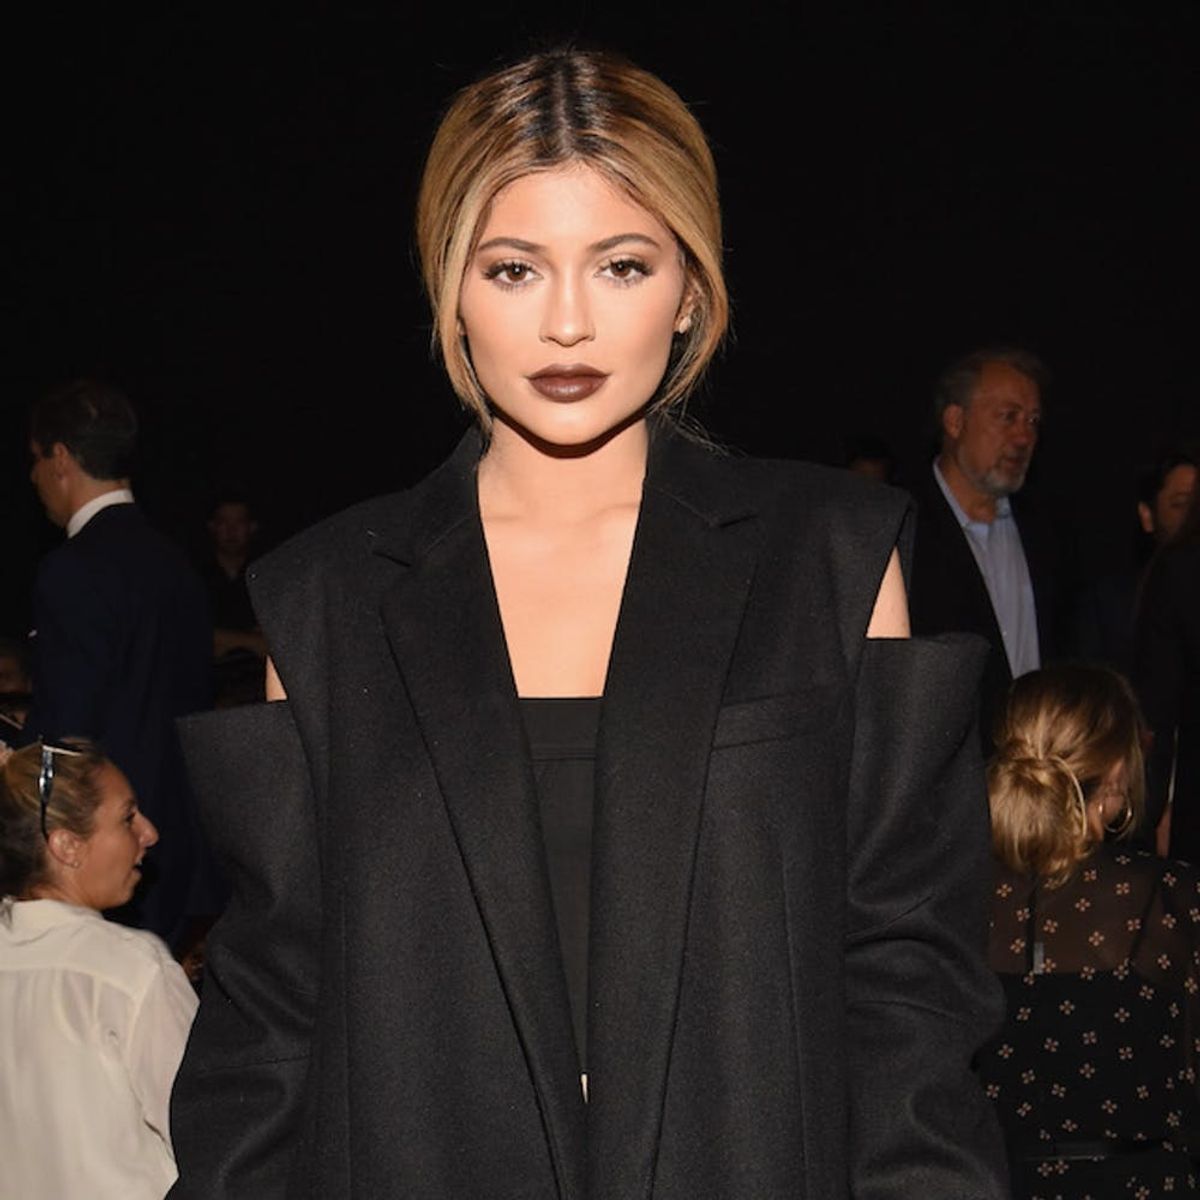 Why Kylie Jenner’s App Is Beating Out Instagram, Snapchat and Facebook